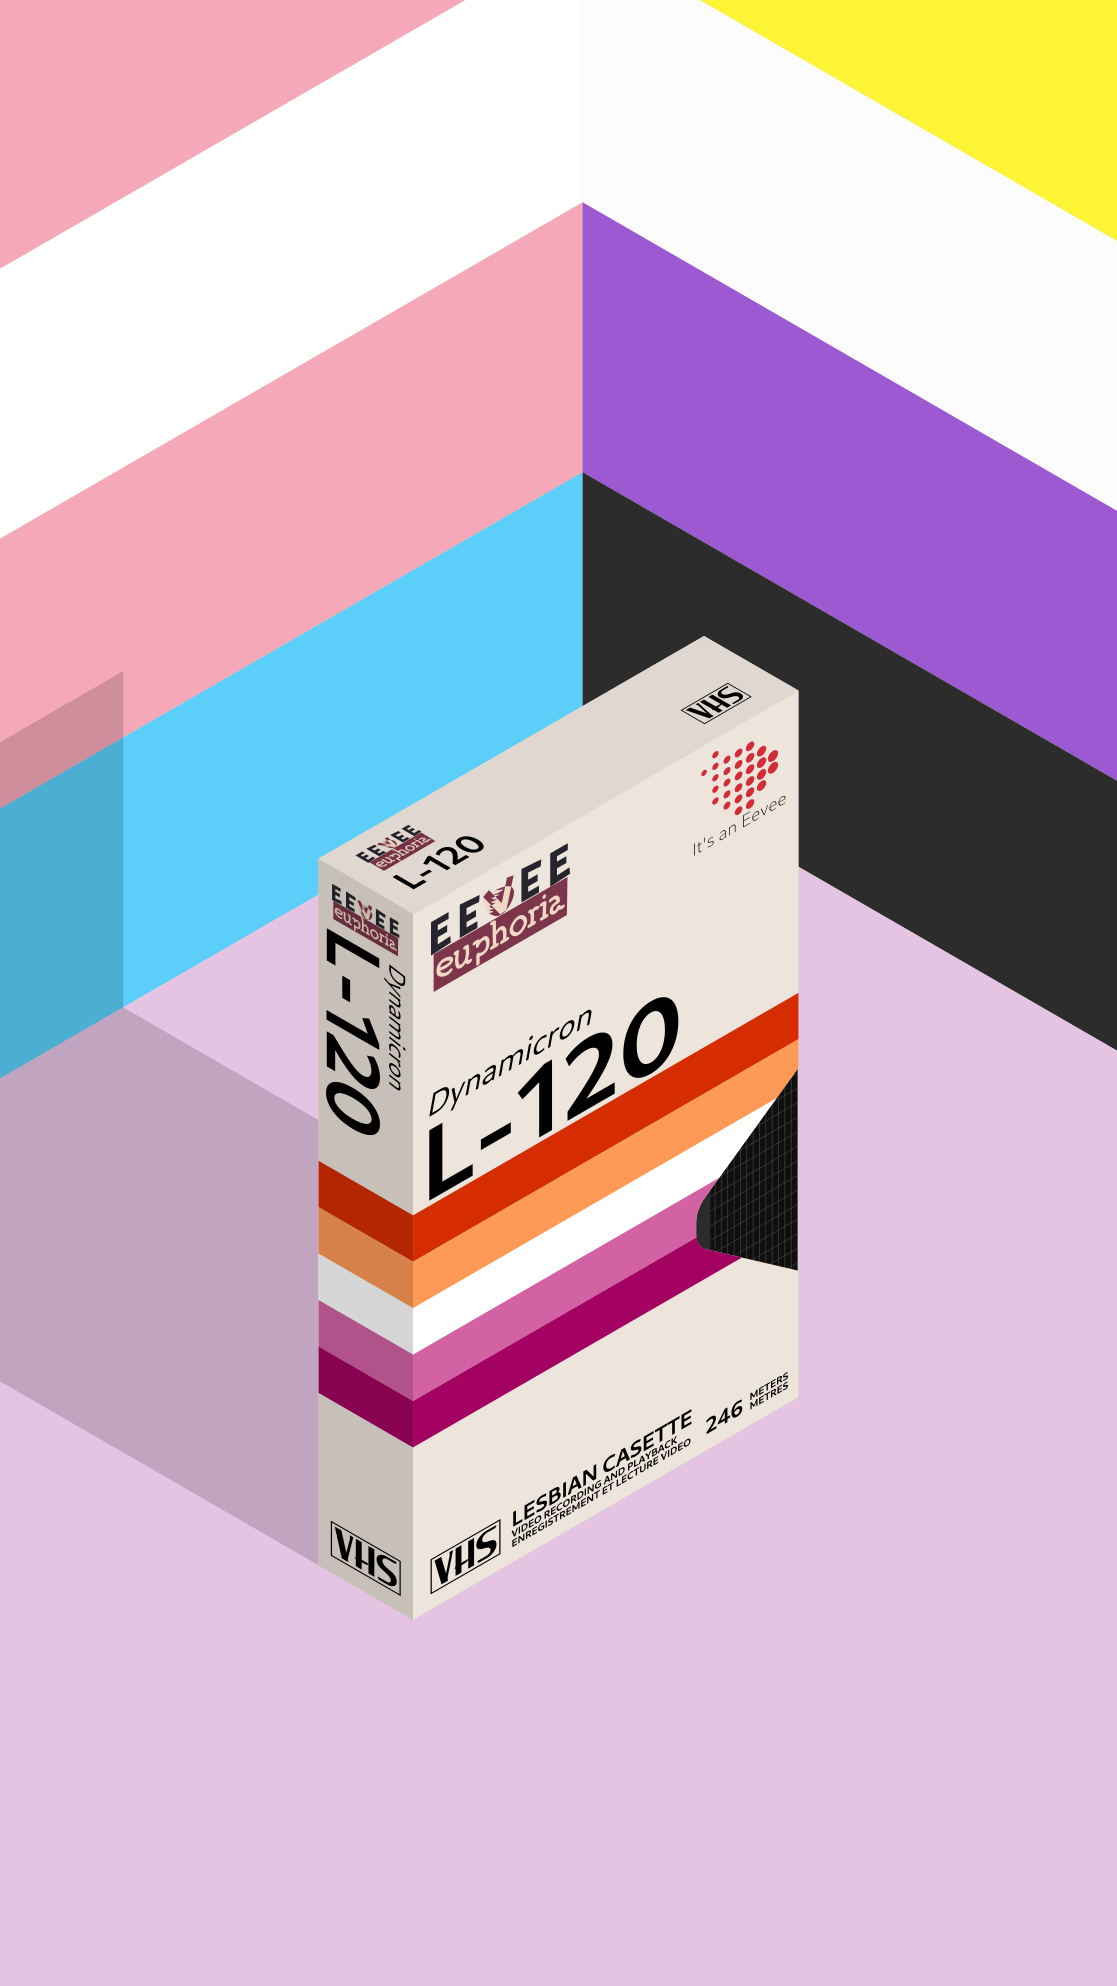 A VHS tape that resembles a familiar Dynamicron T-120 tape, but with a Lesbian flag instead of the colors used originally. The background also features a trans flag and non-binary flag.